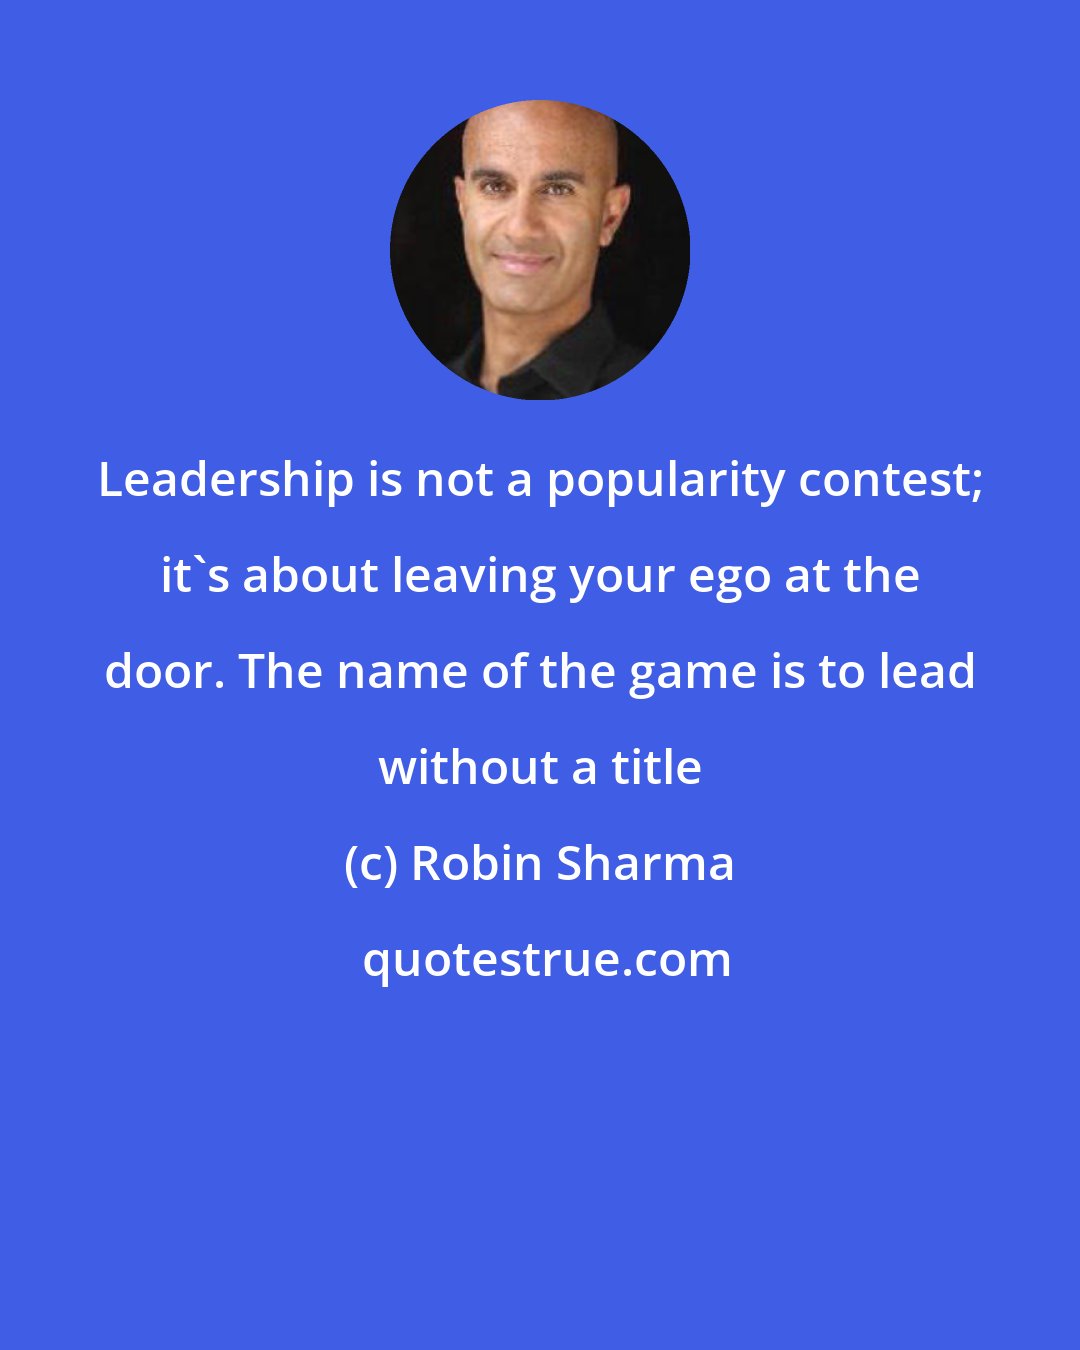 Robin Sharma: Leadership is not a popularity contest; it's about leaving your ego at the door. The name of the game is to lead without a title